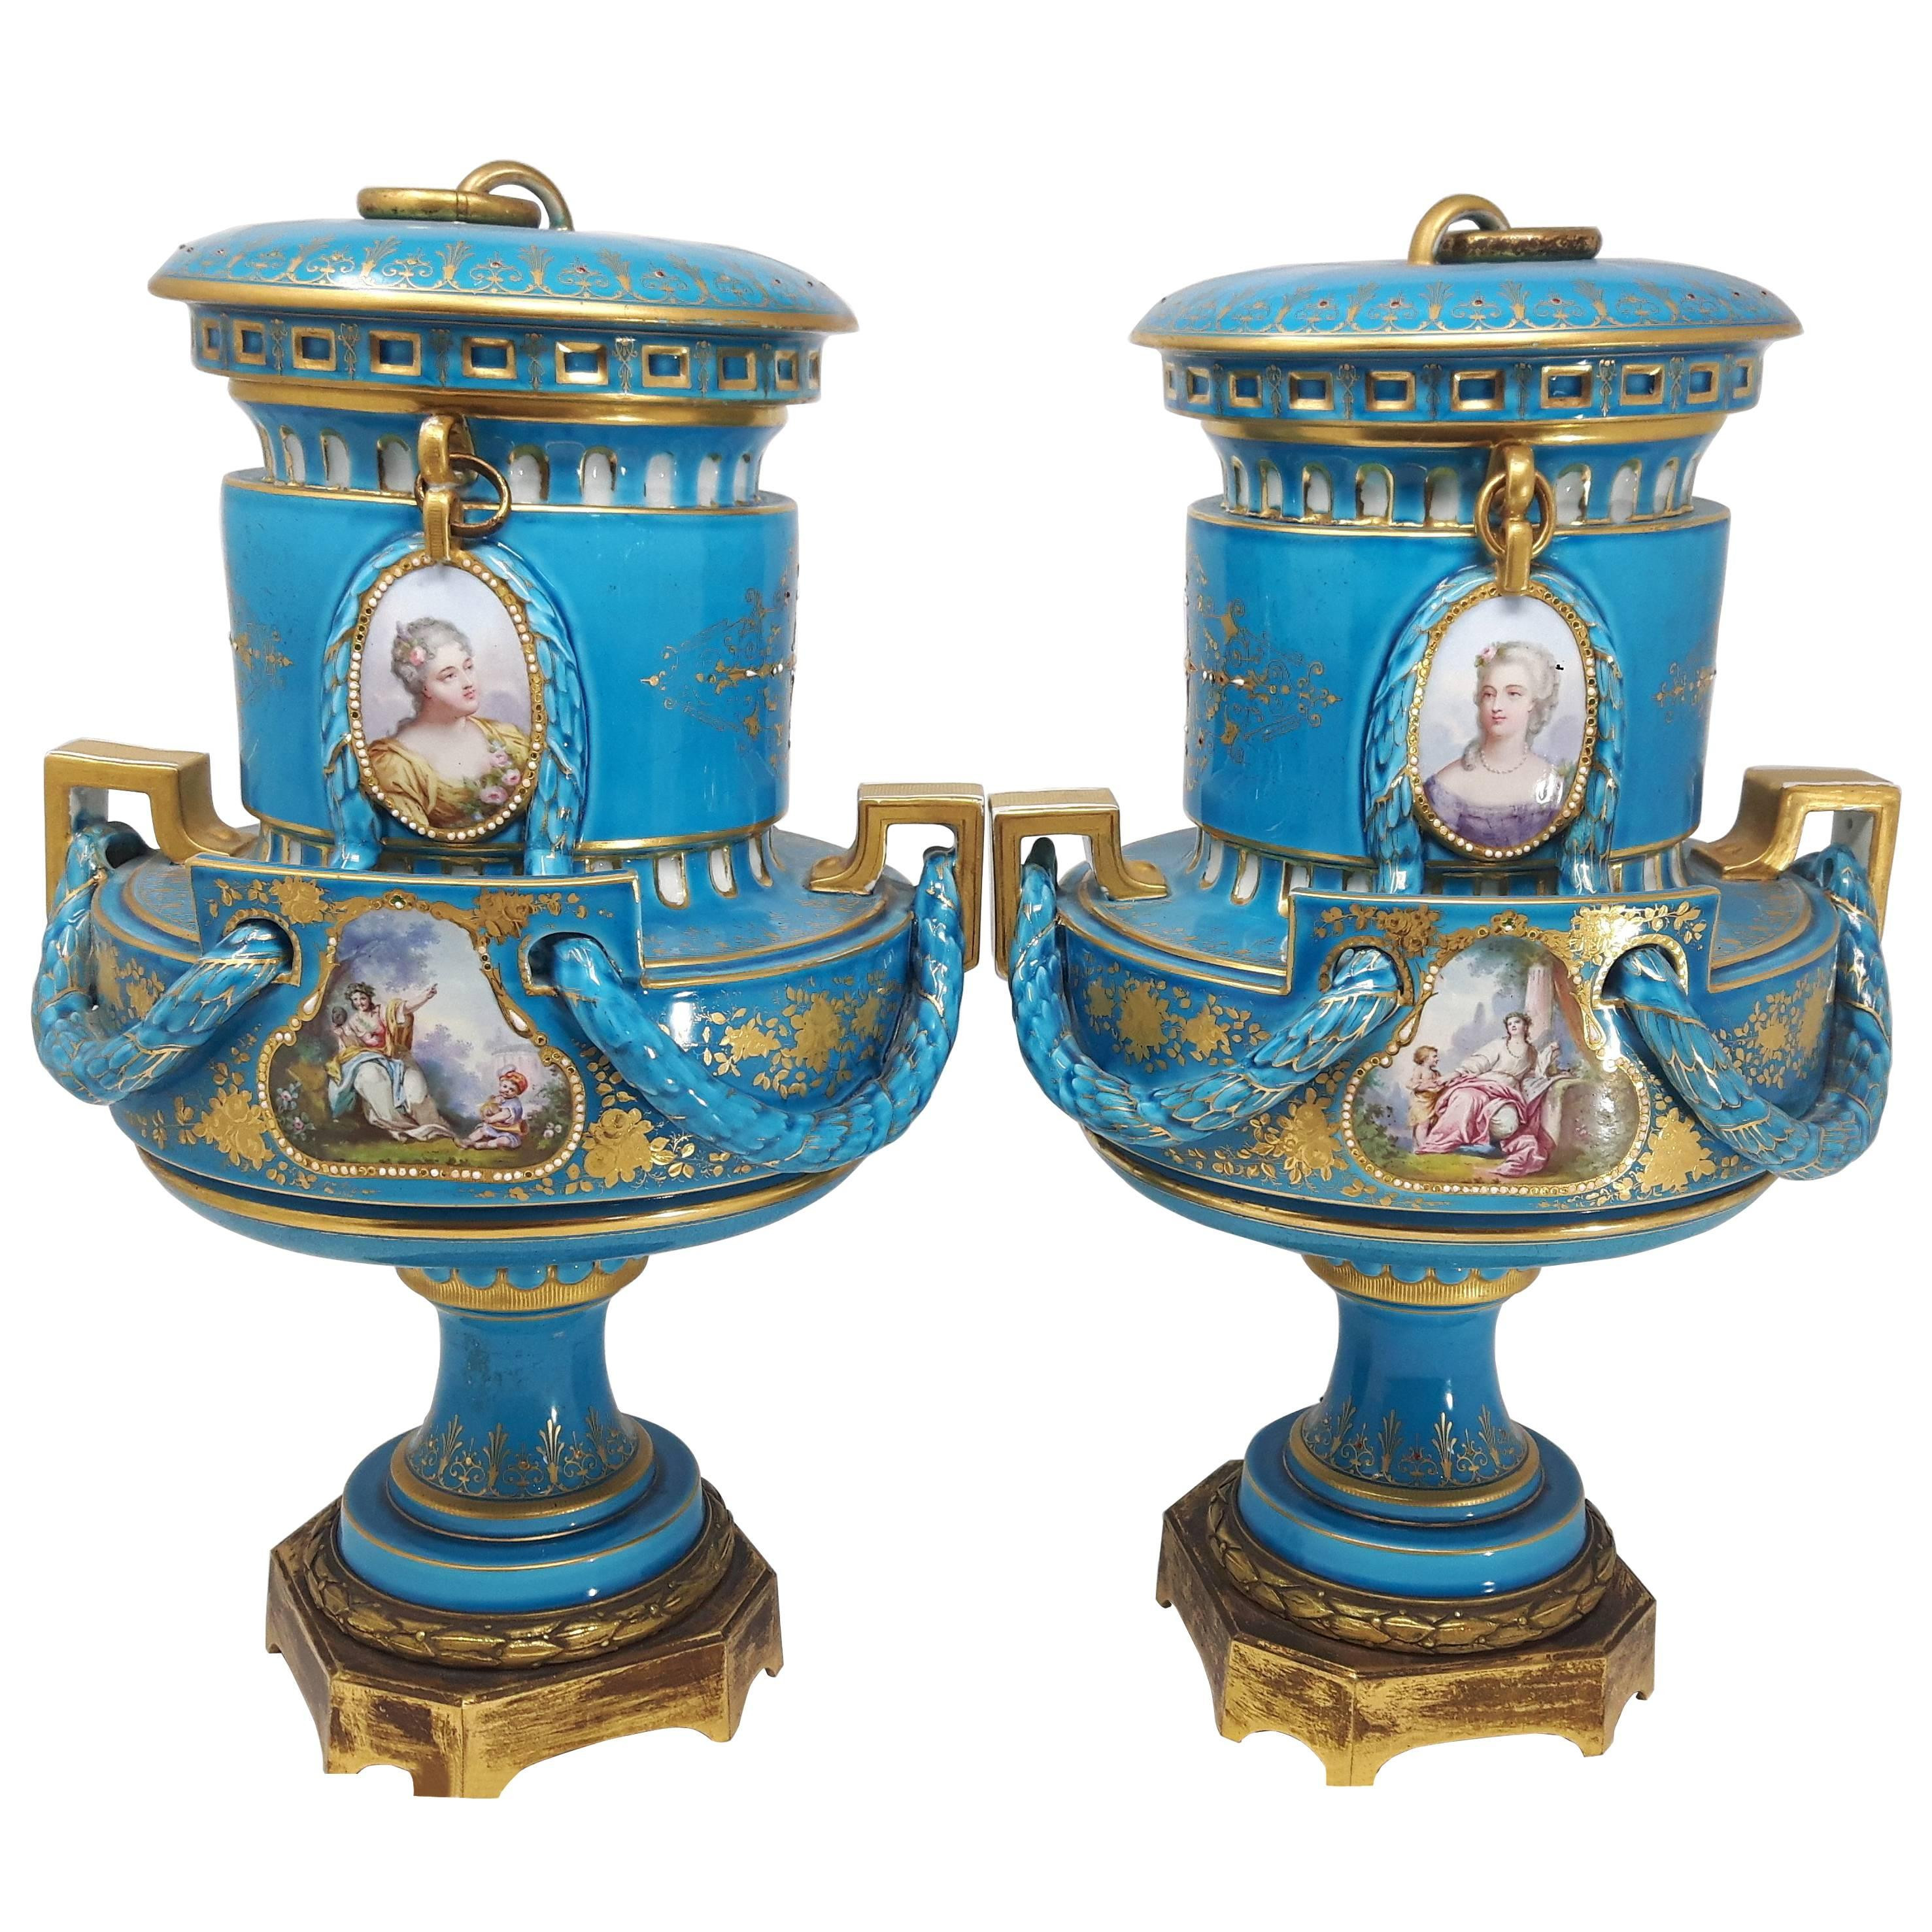 Antique French Porcelain Vases Of Pair Of French Provincial 19th Century Porcelain Serve Vases Circa with Pair Of French Provincial 19th Century Porcelain Serve Vases Circa 1870 for Sale at 1stdibs